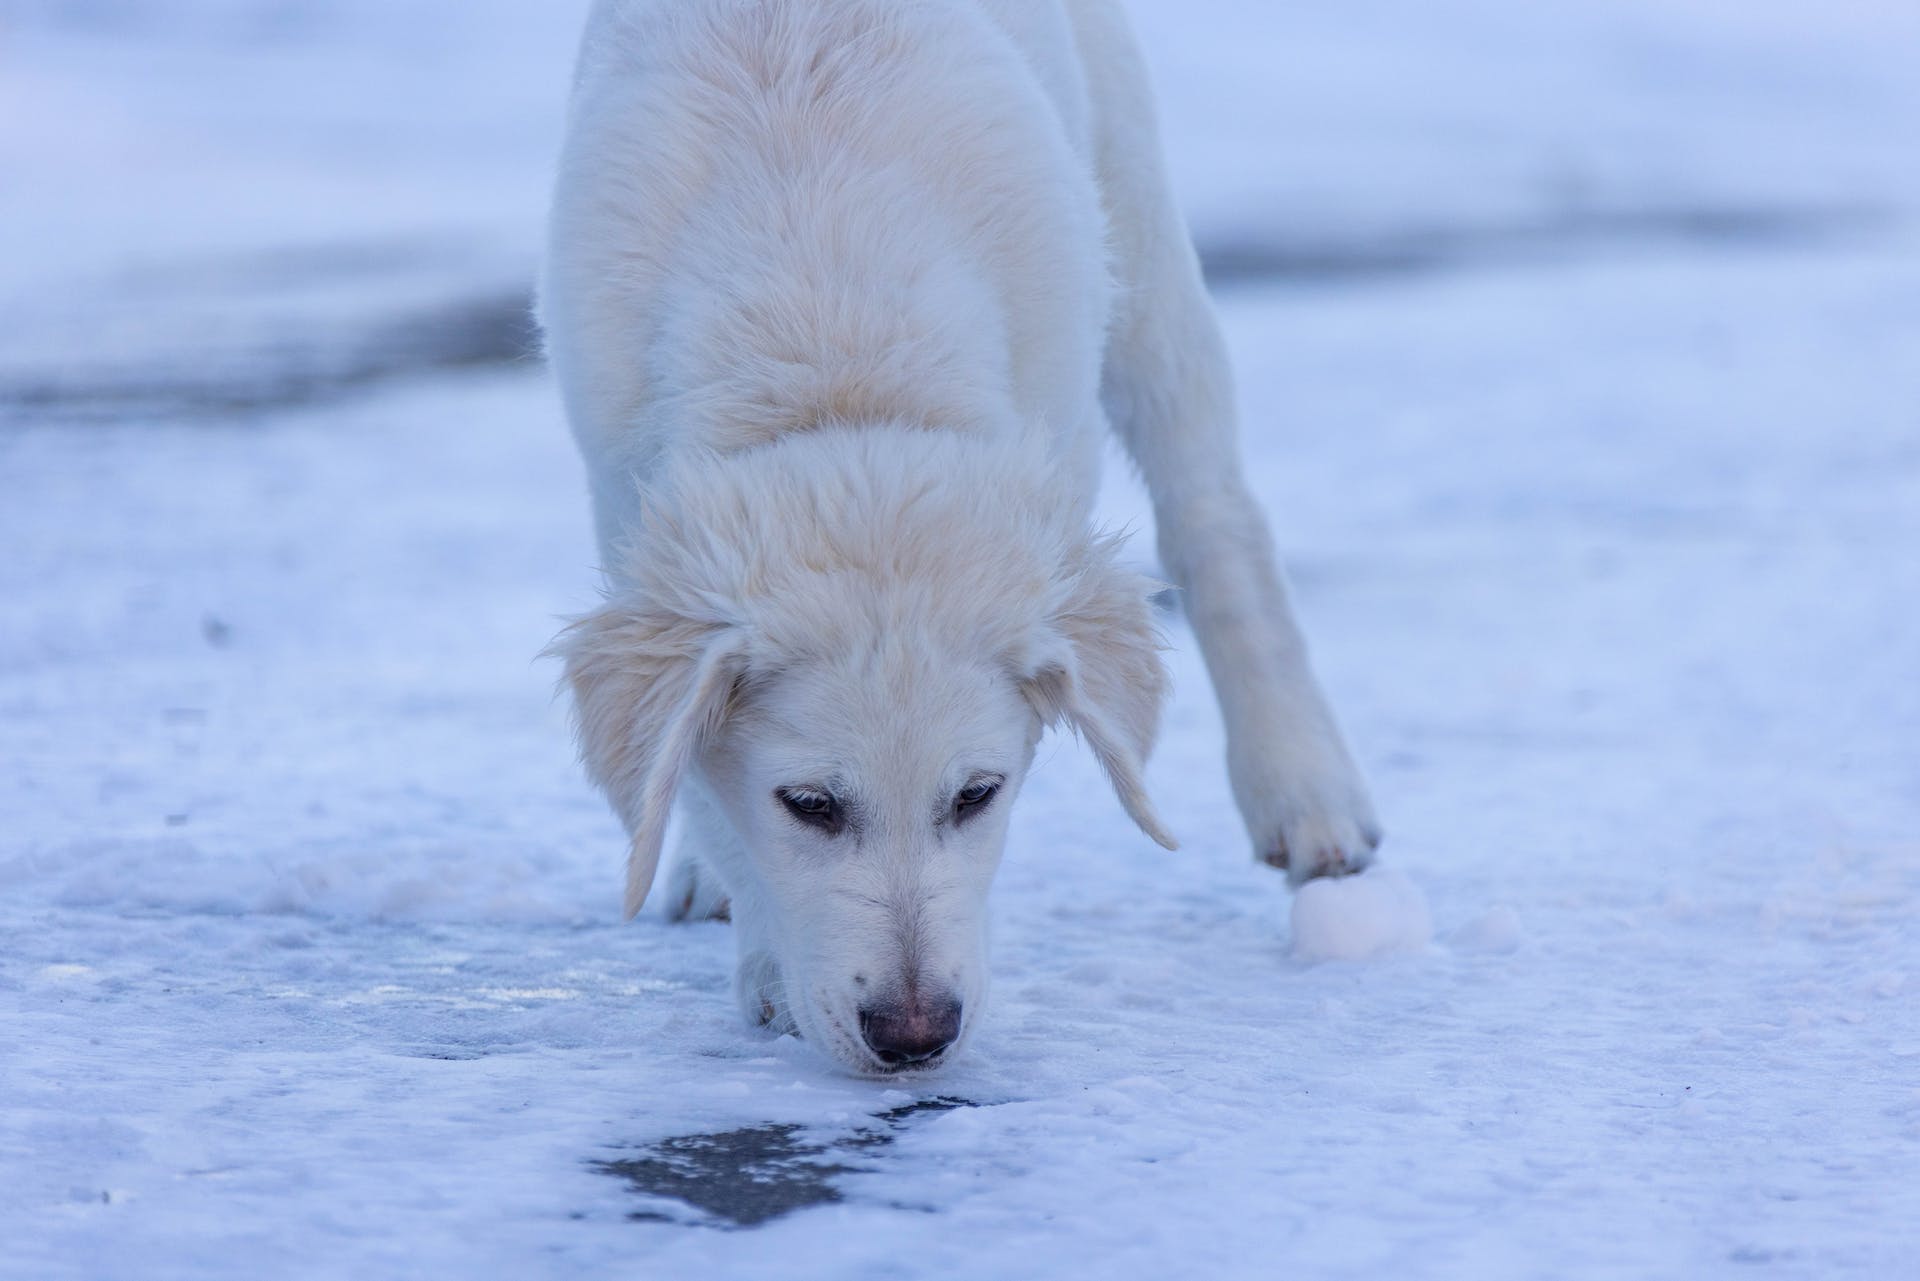 A senior dog sniffing the snow